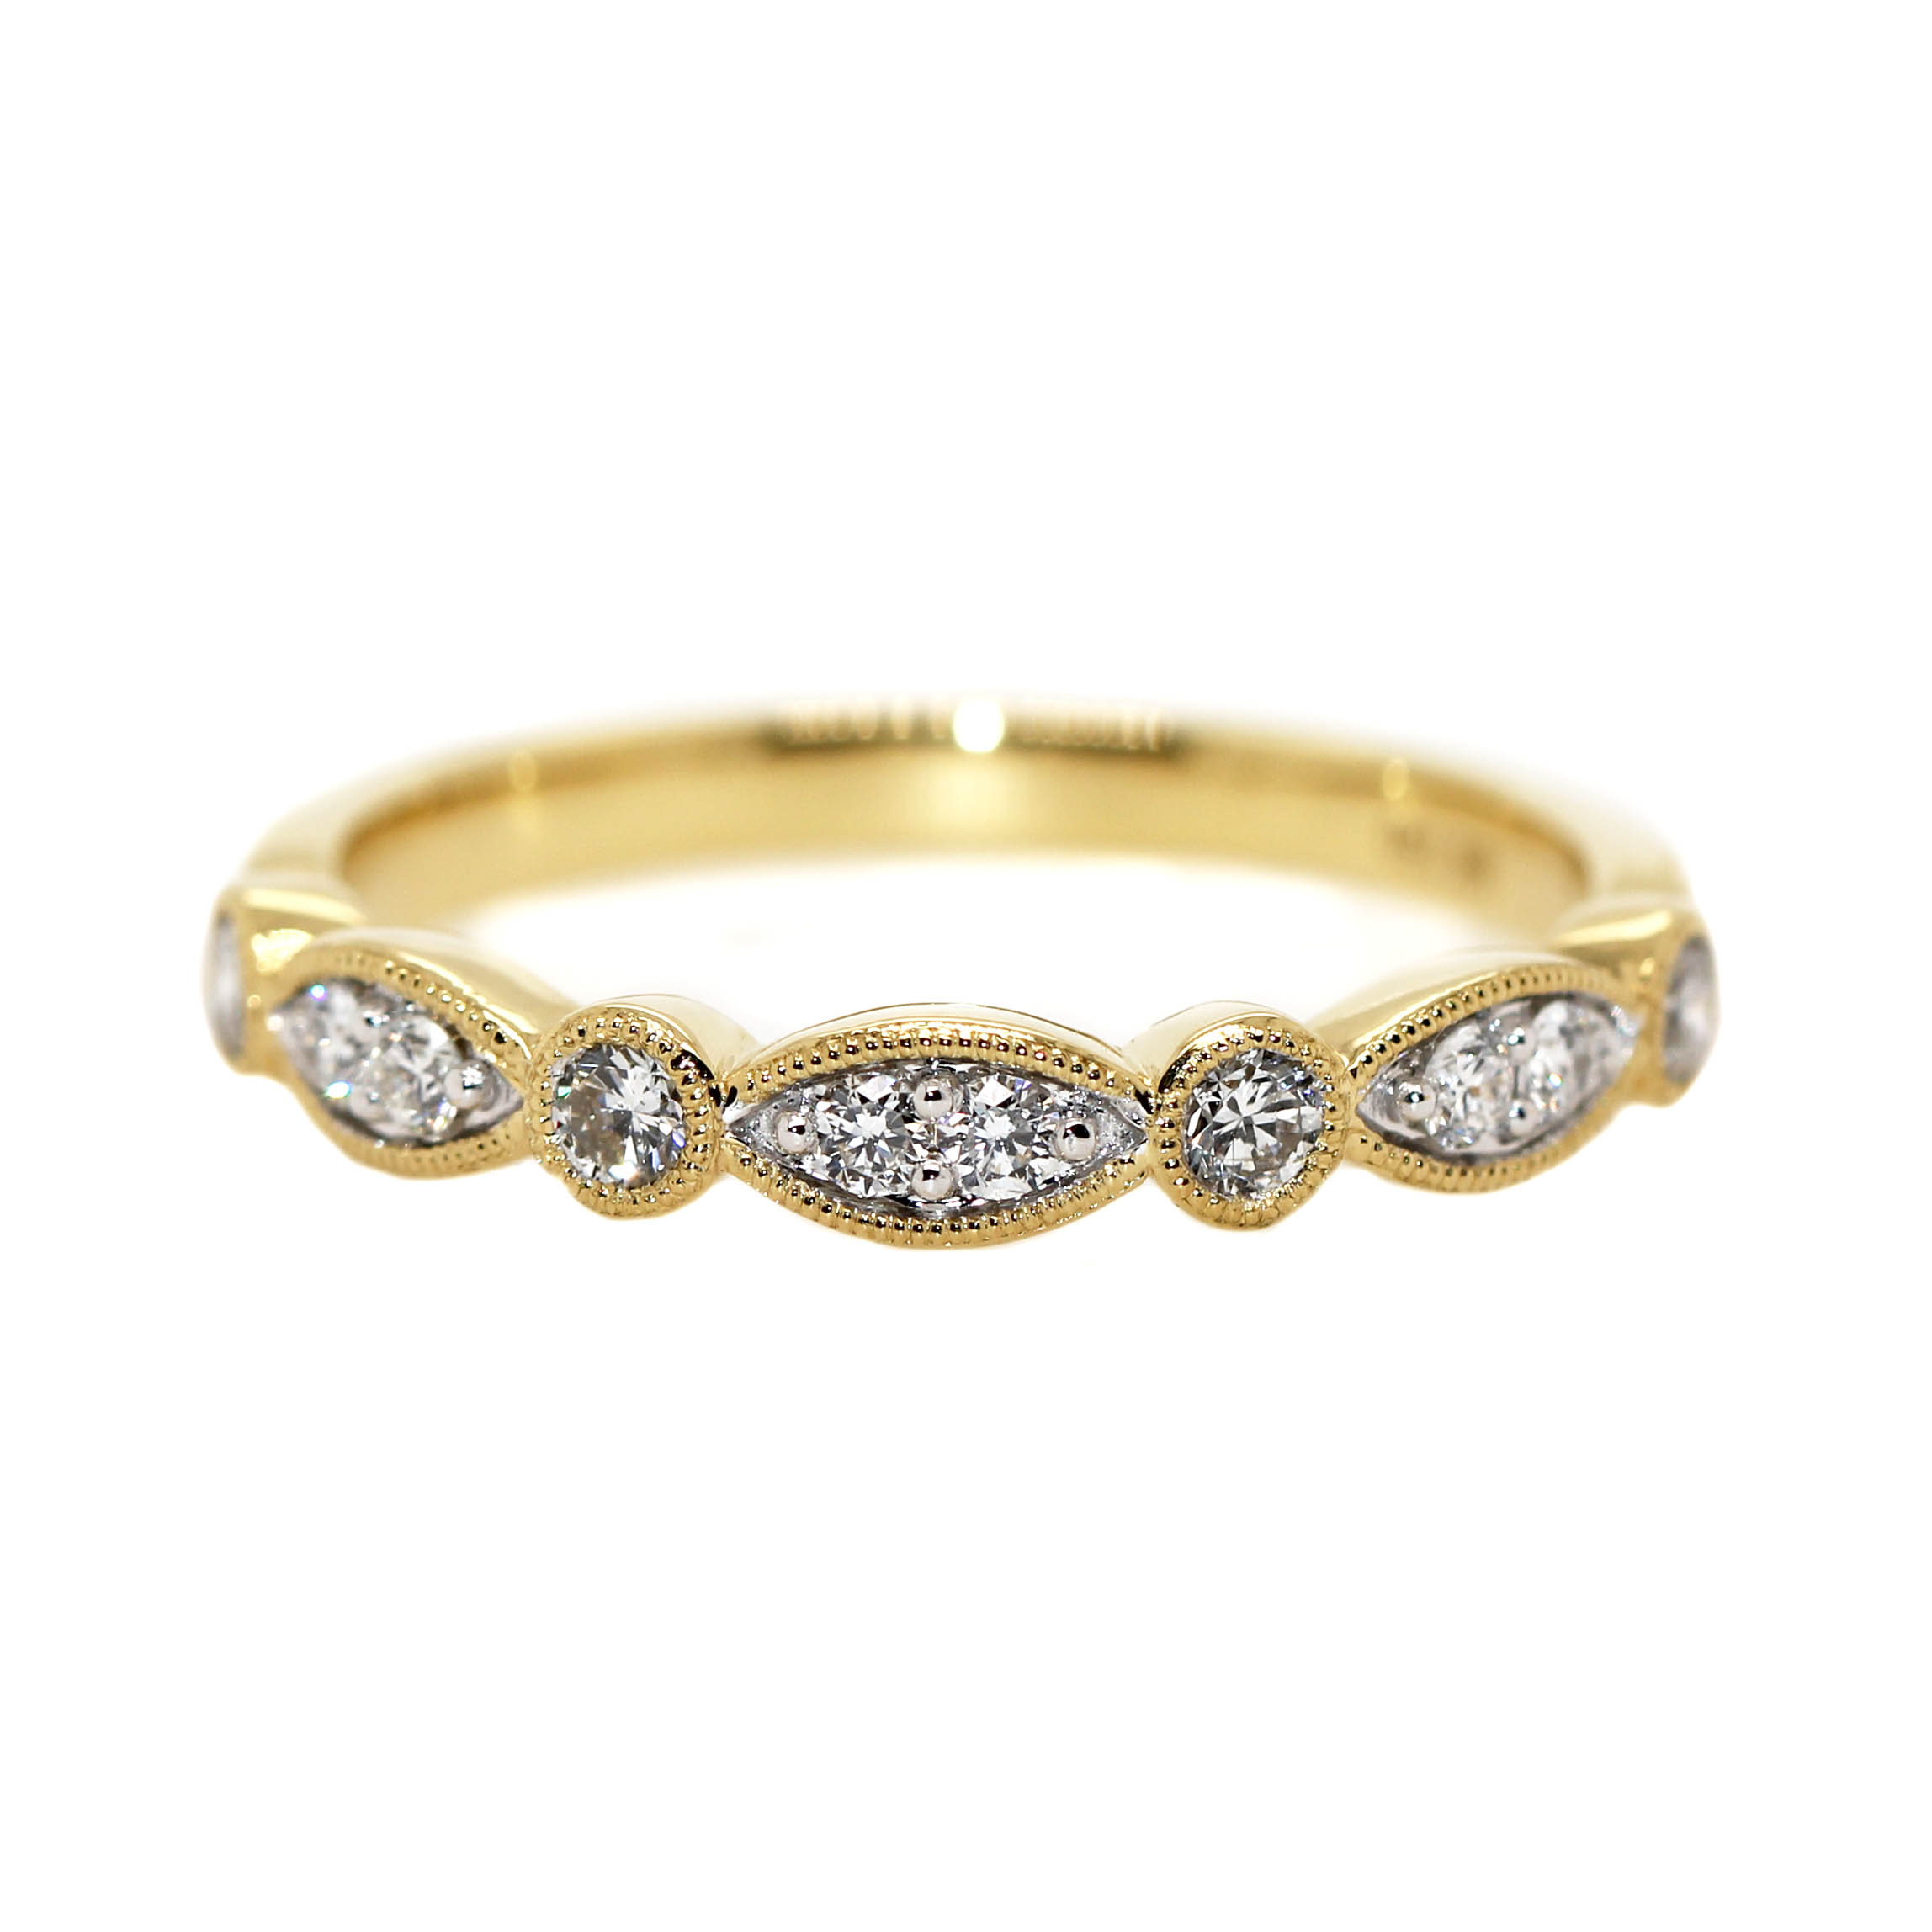 18ct Yellow Gold & a total Diamond weight of .40ct.